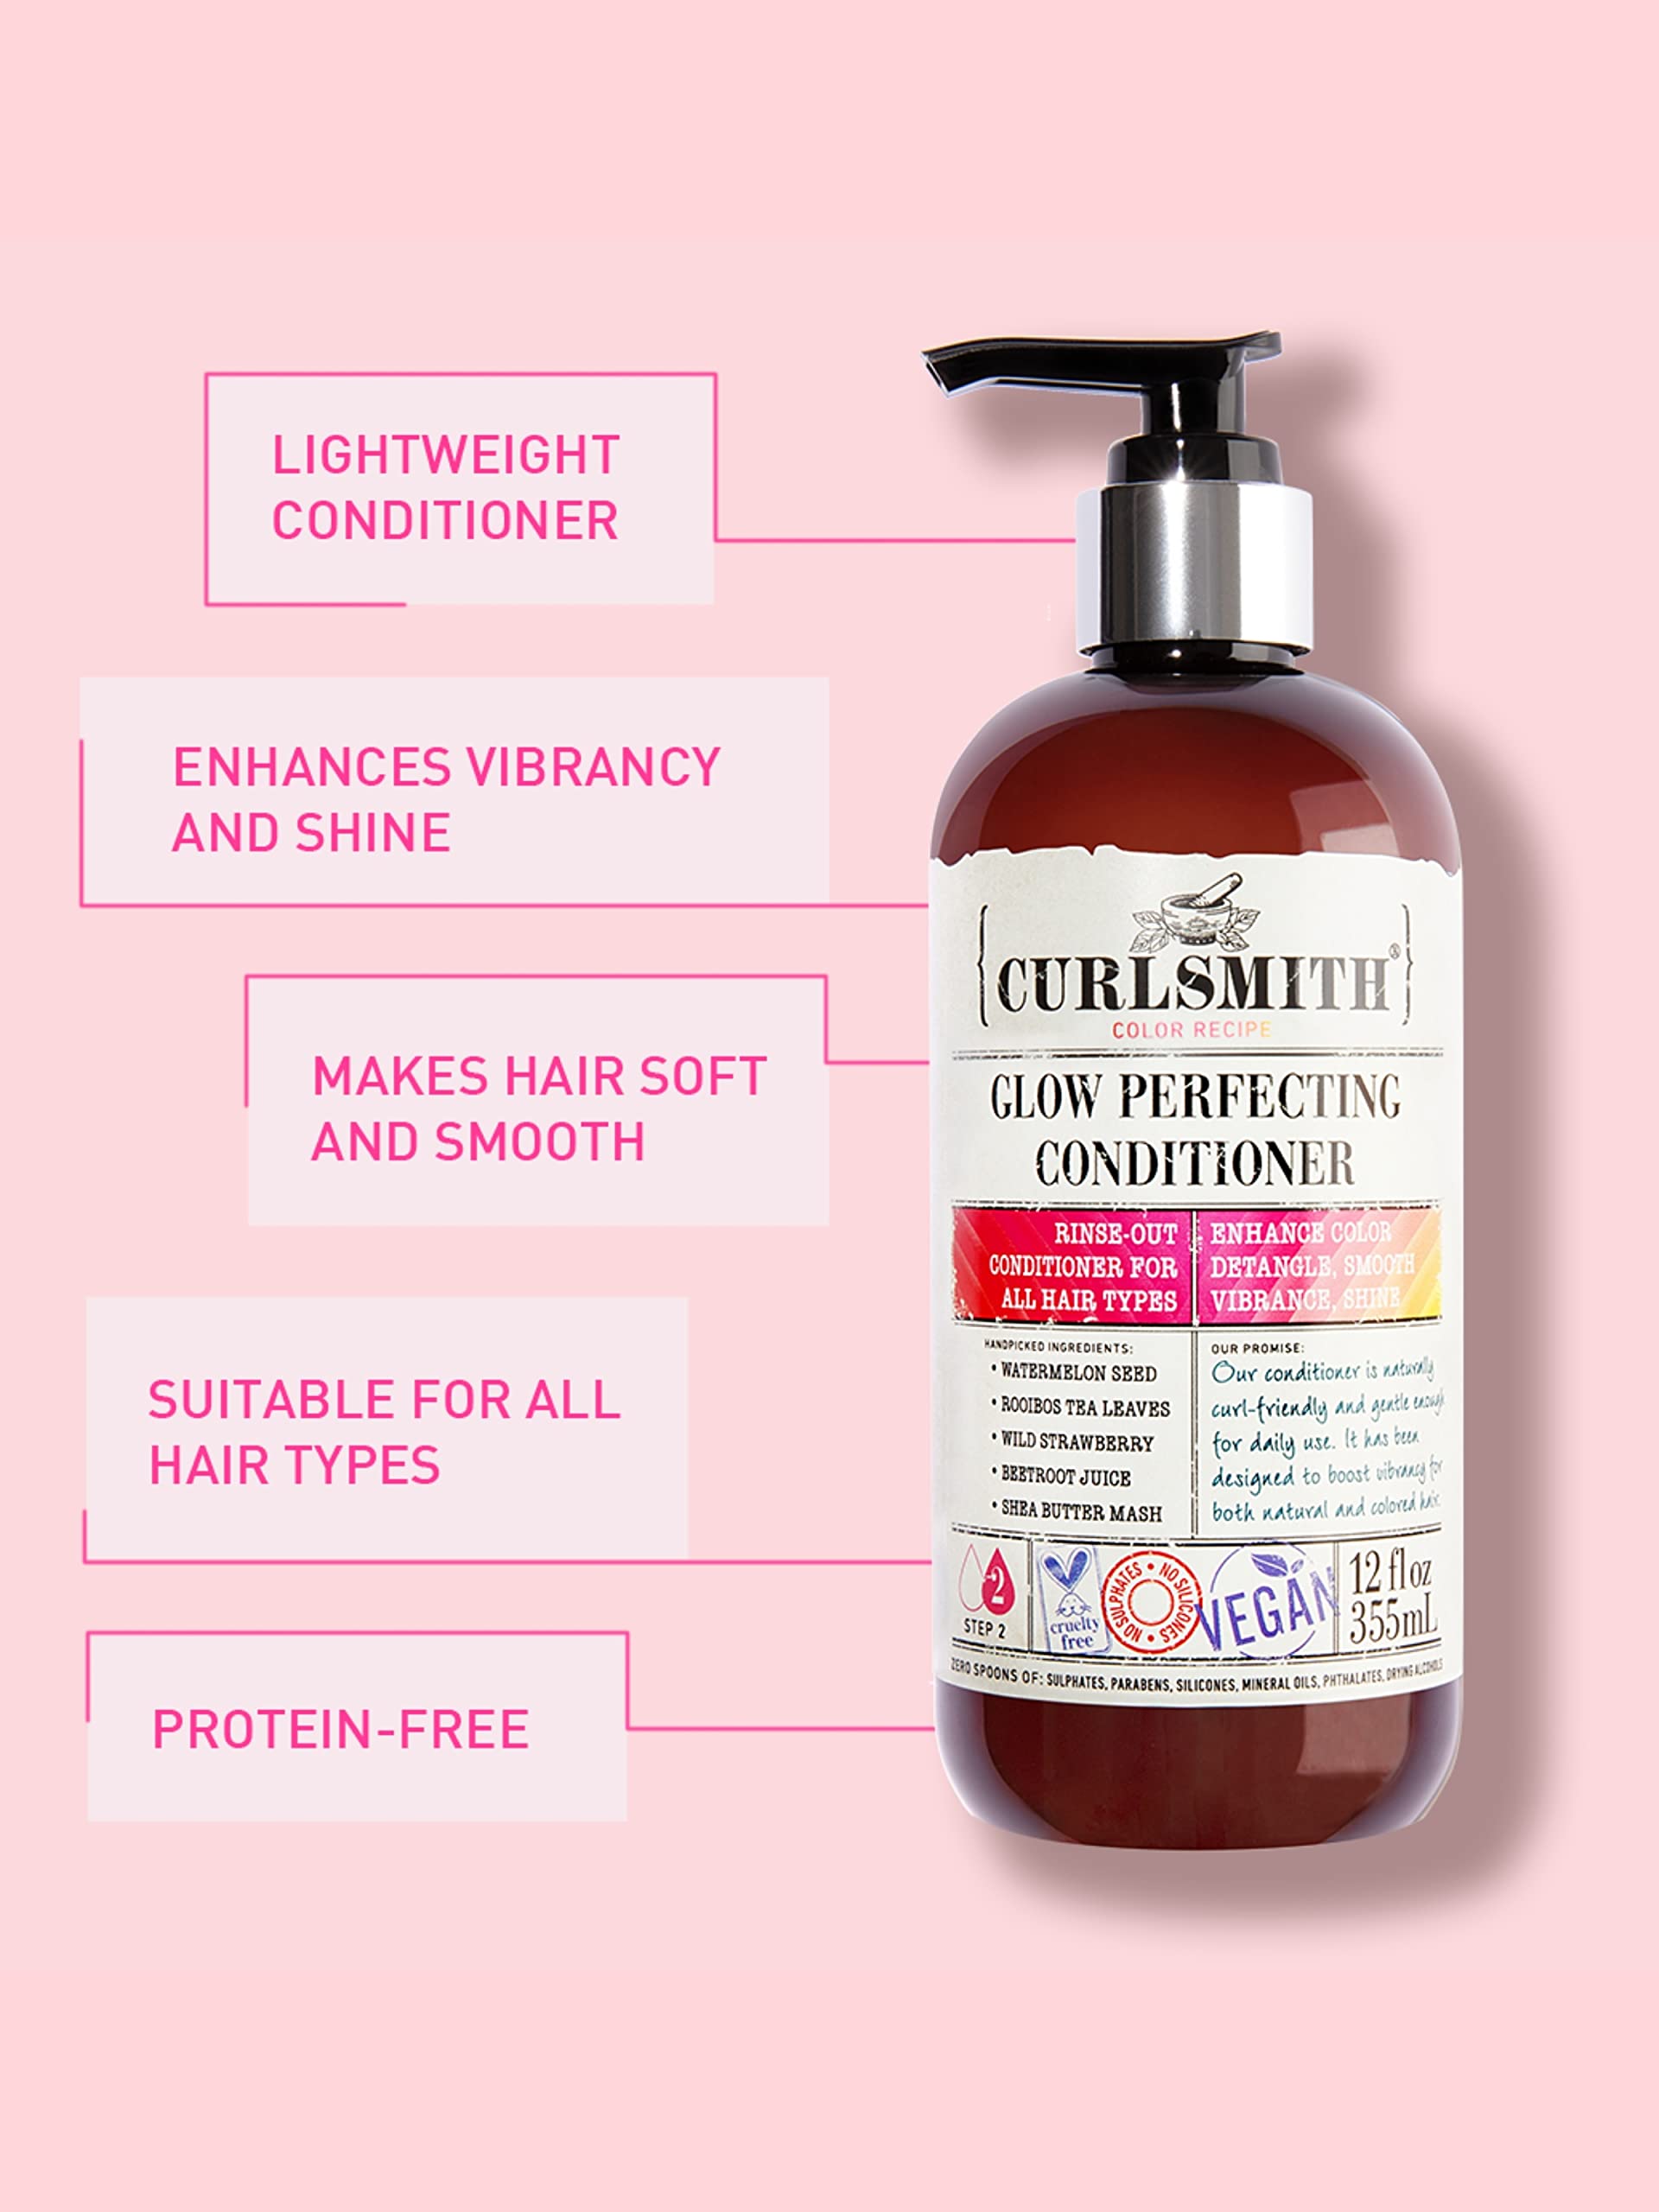 CURLSMITH - Glow Perfecting Conditioner - Vegan Conditioner for Any Hair Type (32 fl oz)